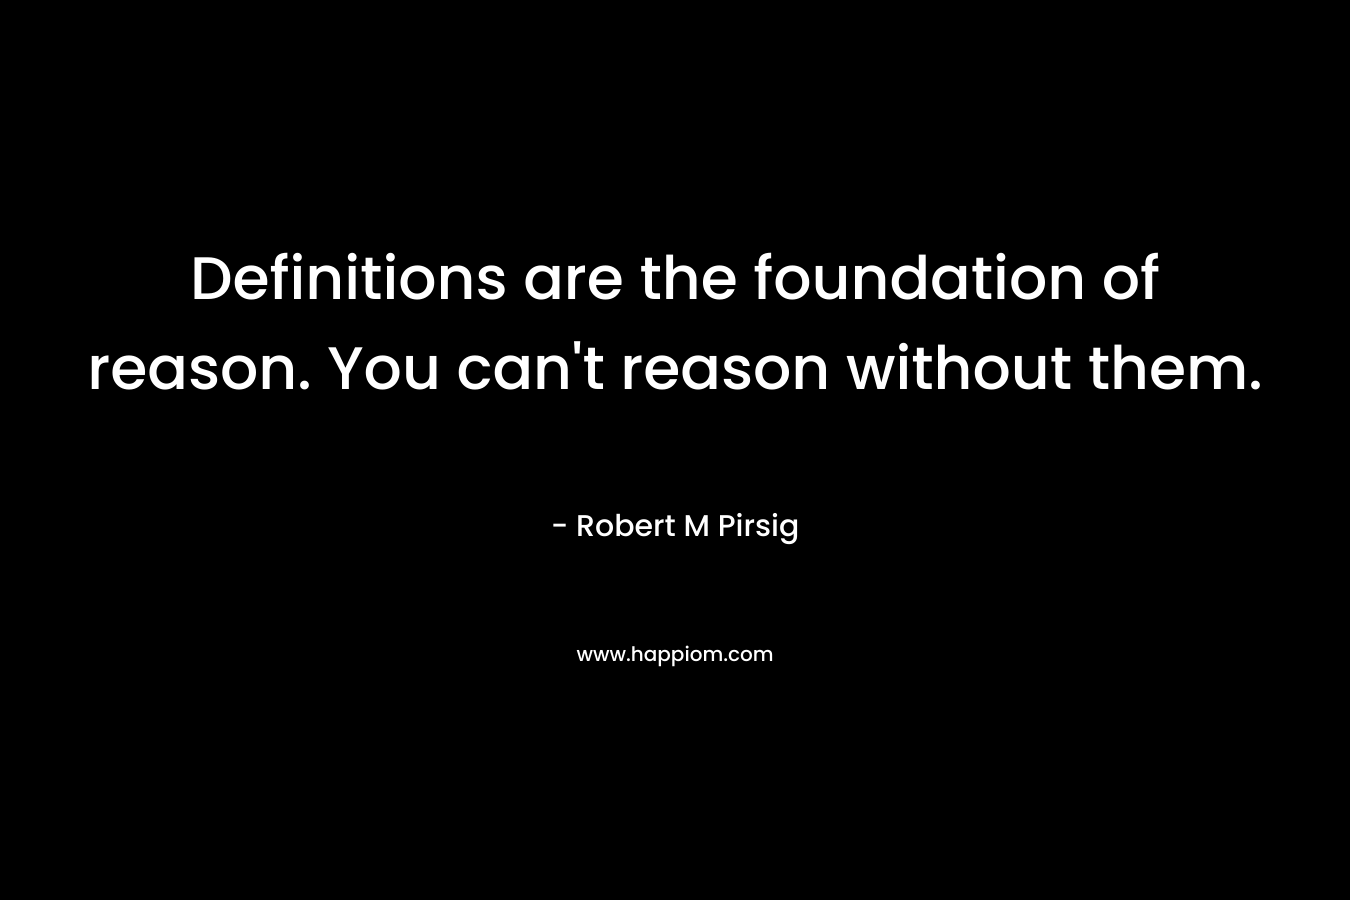 Definitions are the foundation of reason. You can't reason without them.